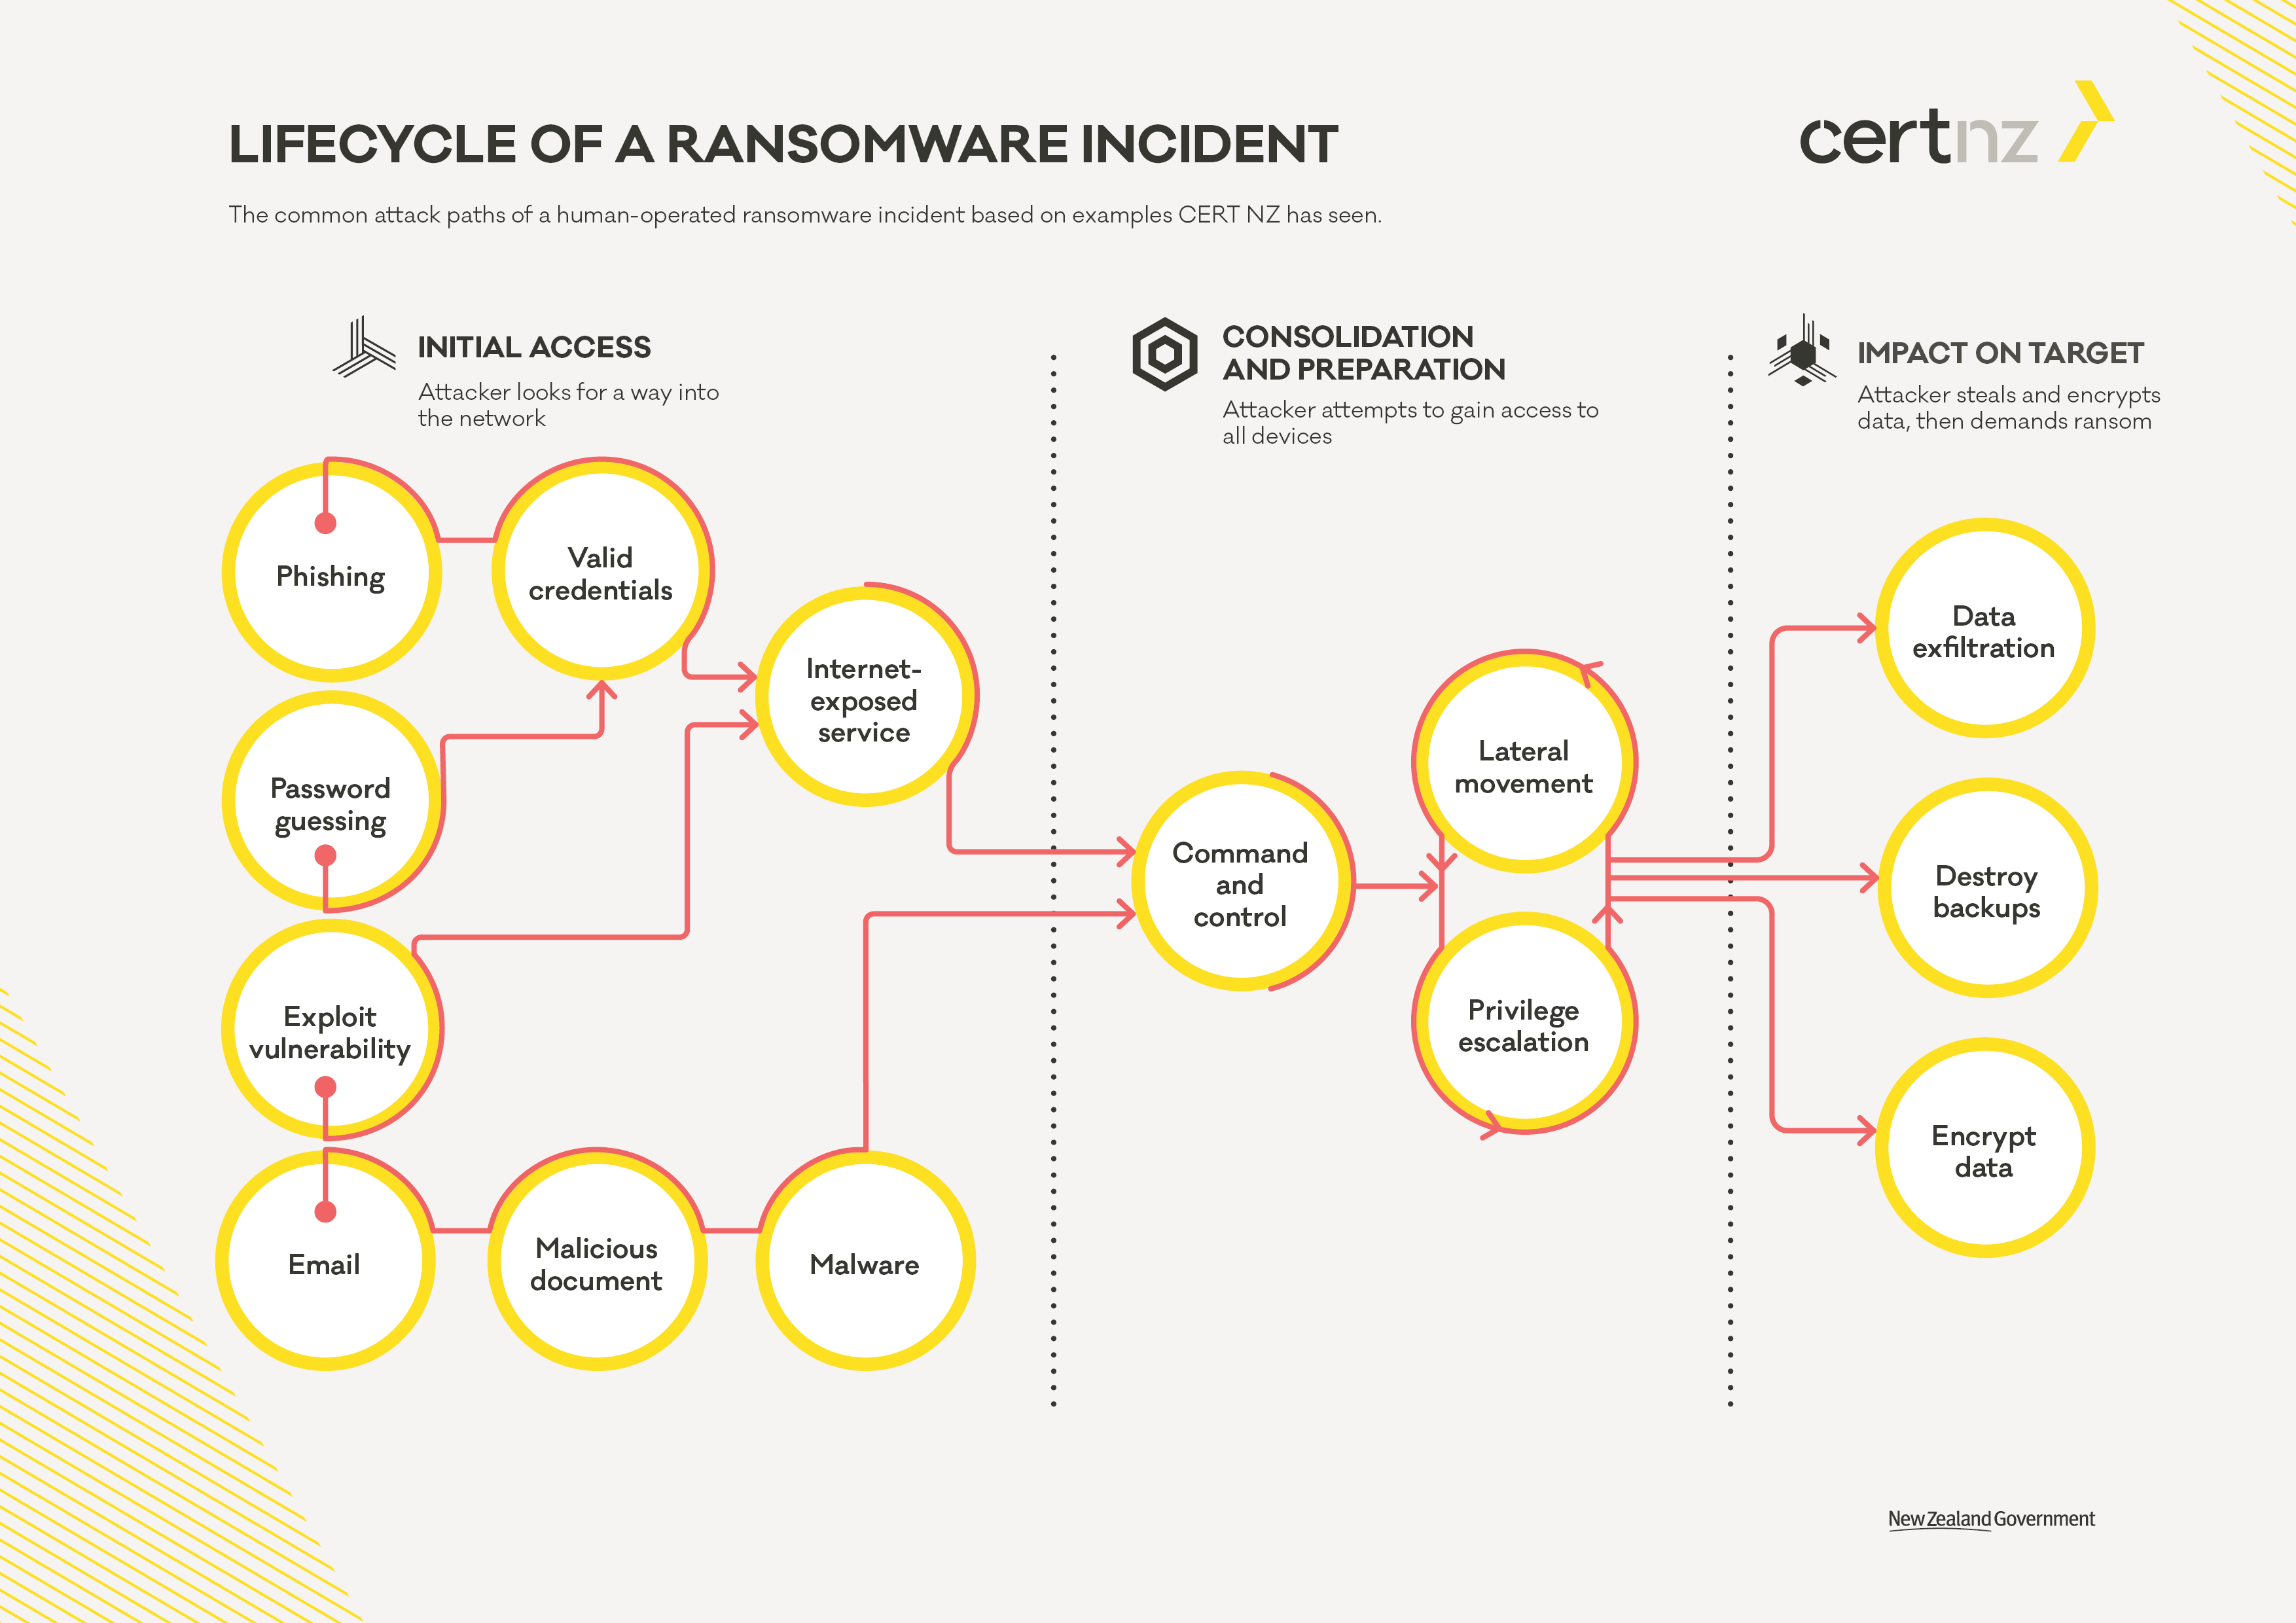 6860 CERT Lifecycle of a Ransomware Incident v10